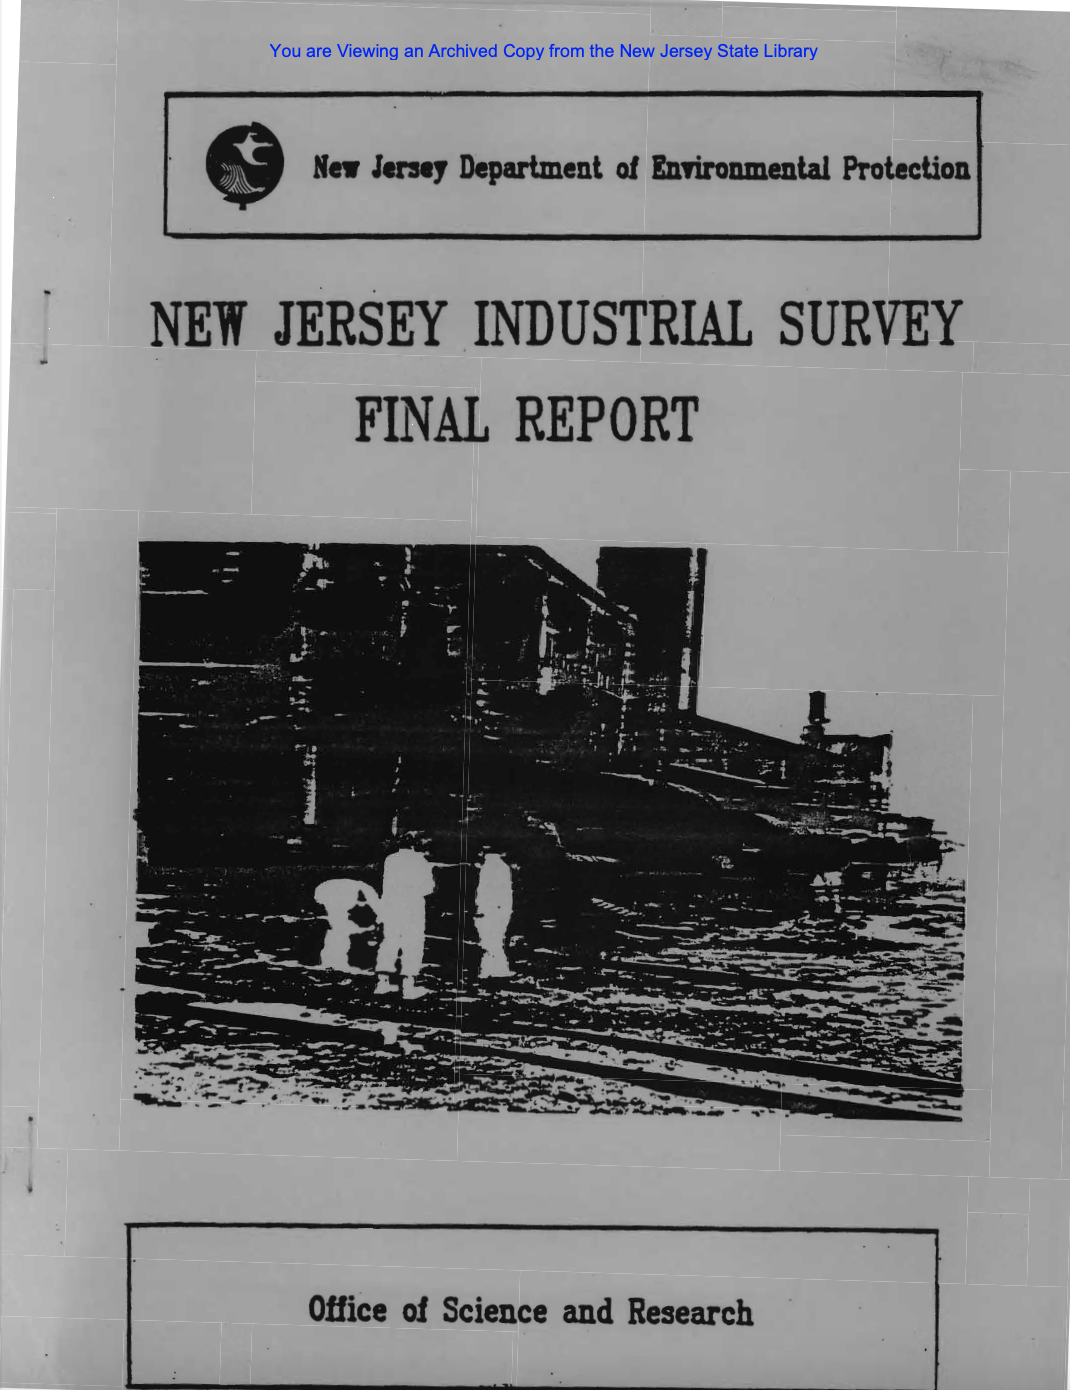 The New Jersey Industrial Survey Project